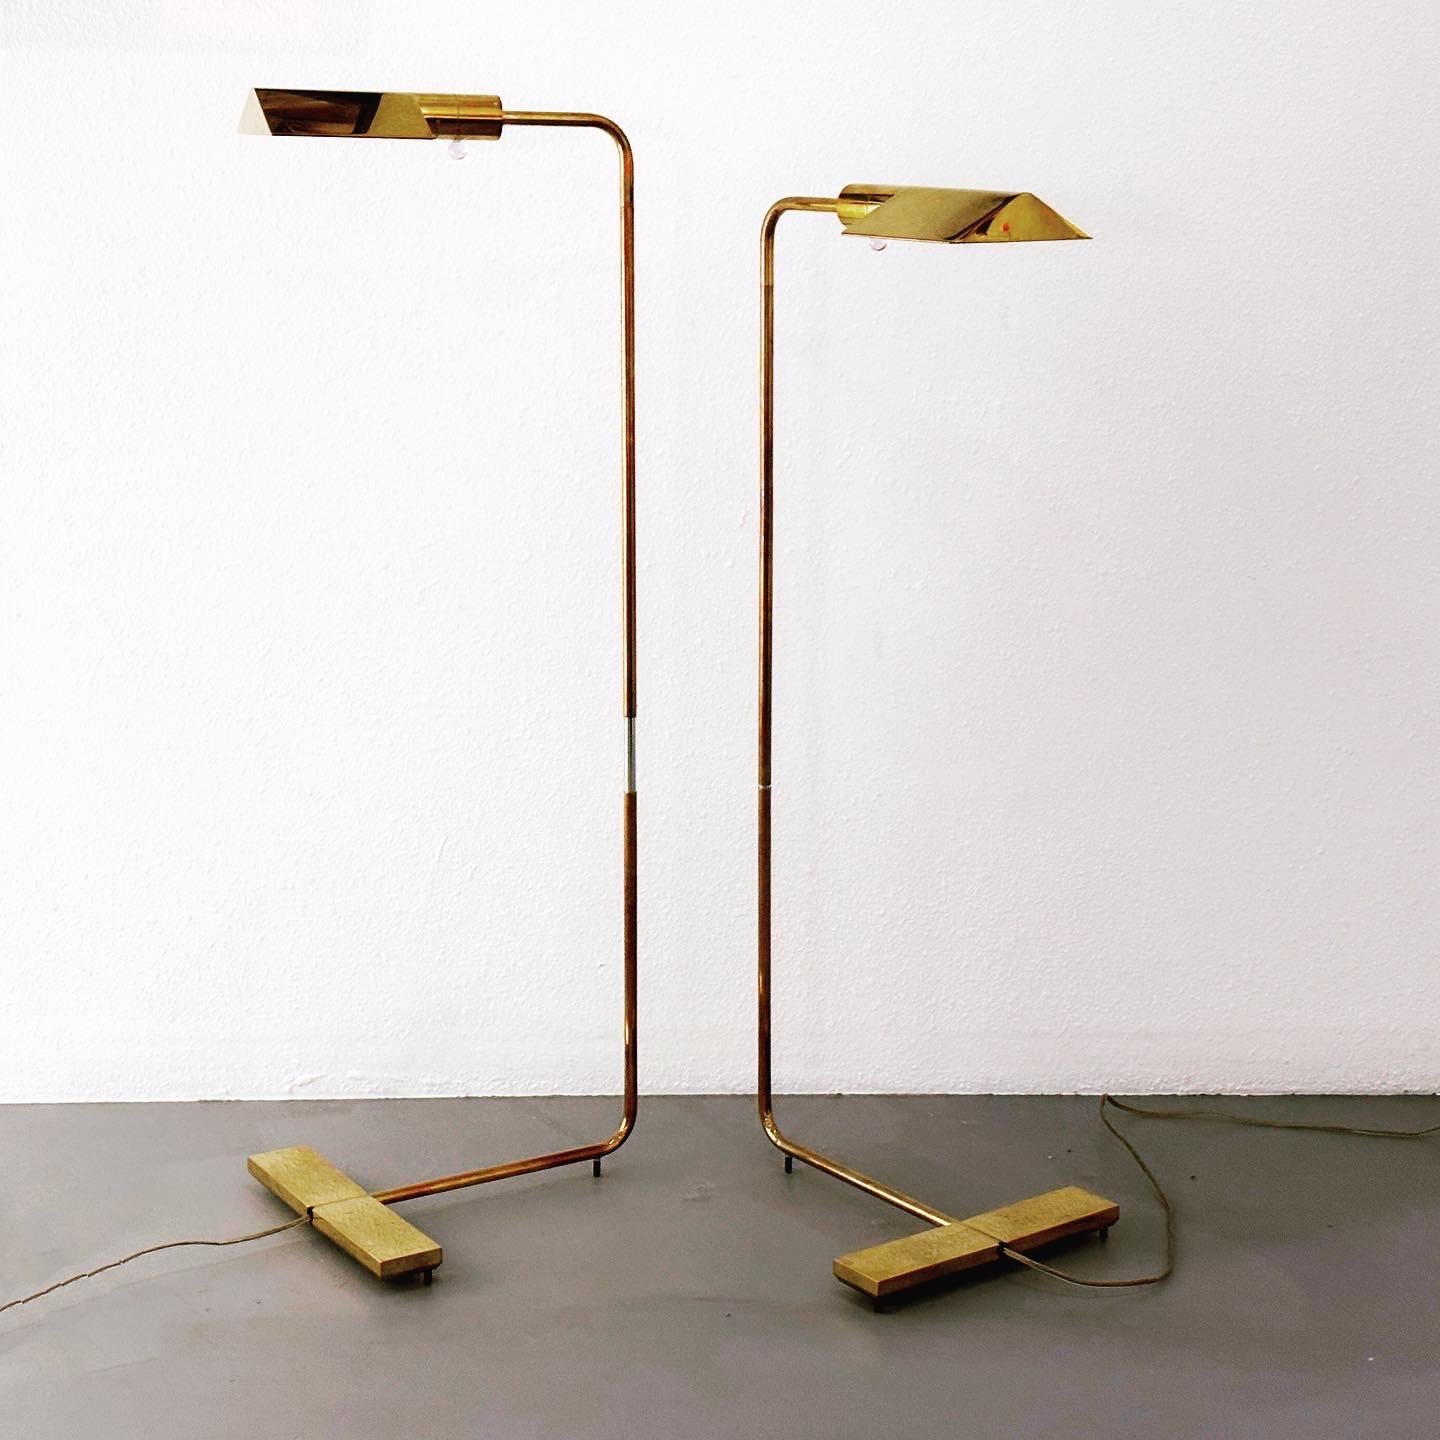 Cedric Hartman Pair Signed Adjustable Brass Reading Lamps Model 1UWV, 1967 Design.

This model is officially called the Low Profile Luminaire and is in the collection of the Museum of Modern Art. It is an exquisite and minimal designed deserving of